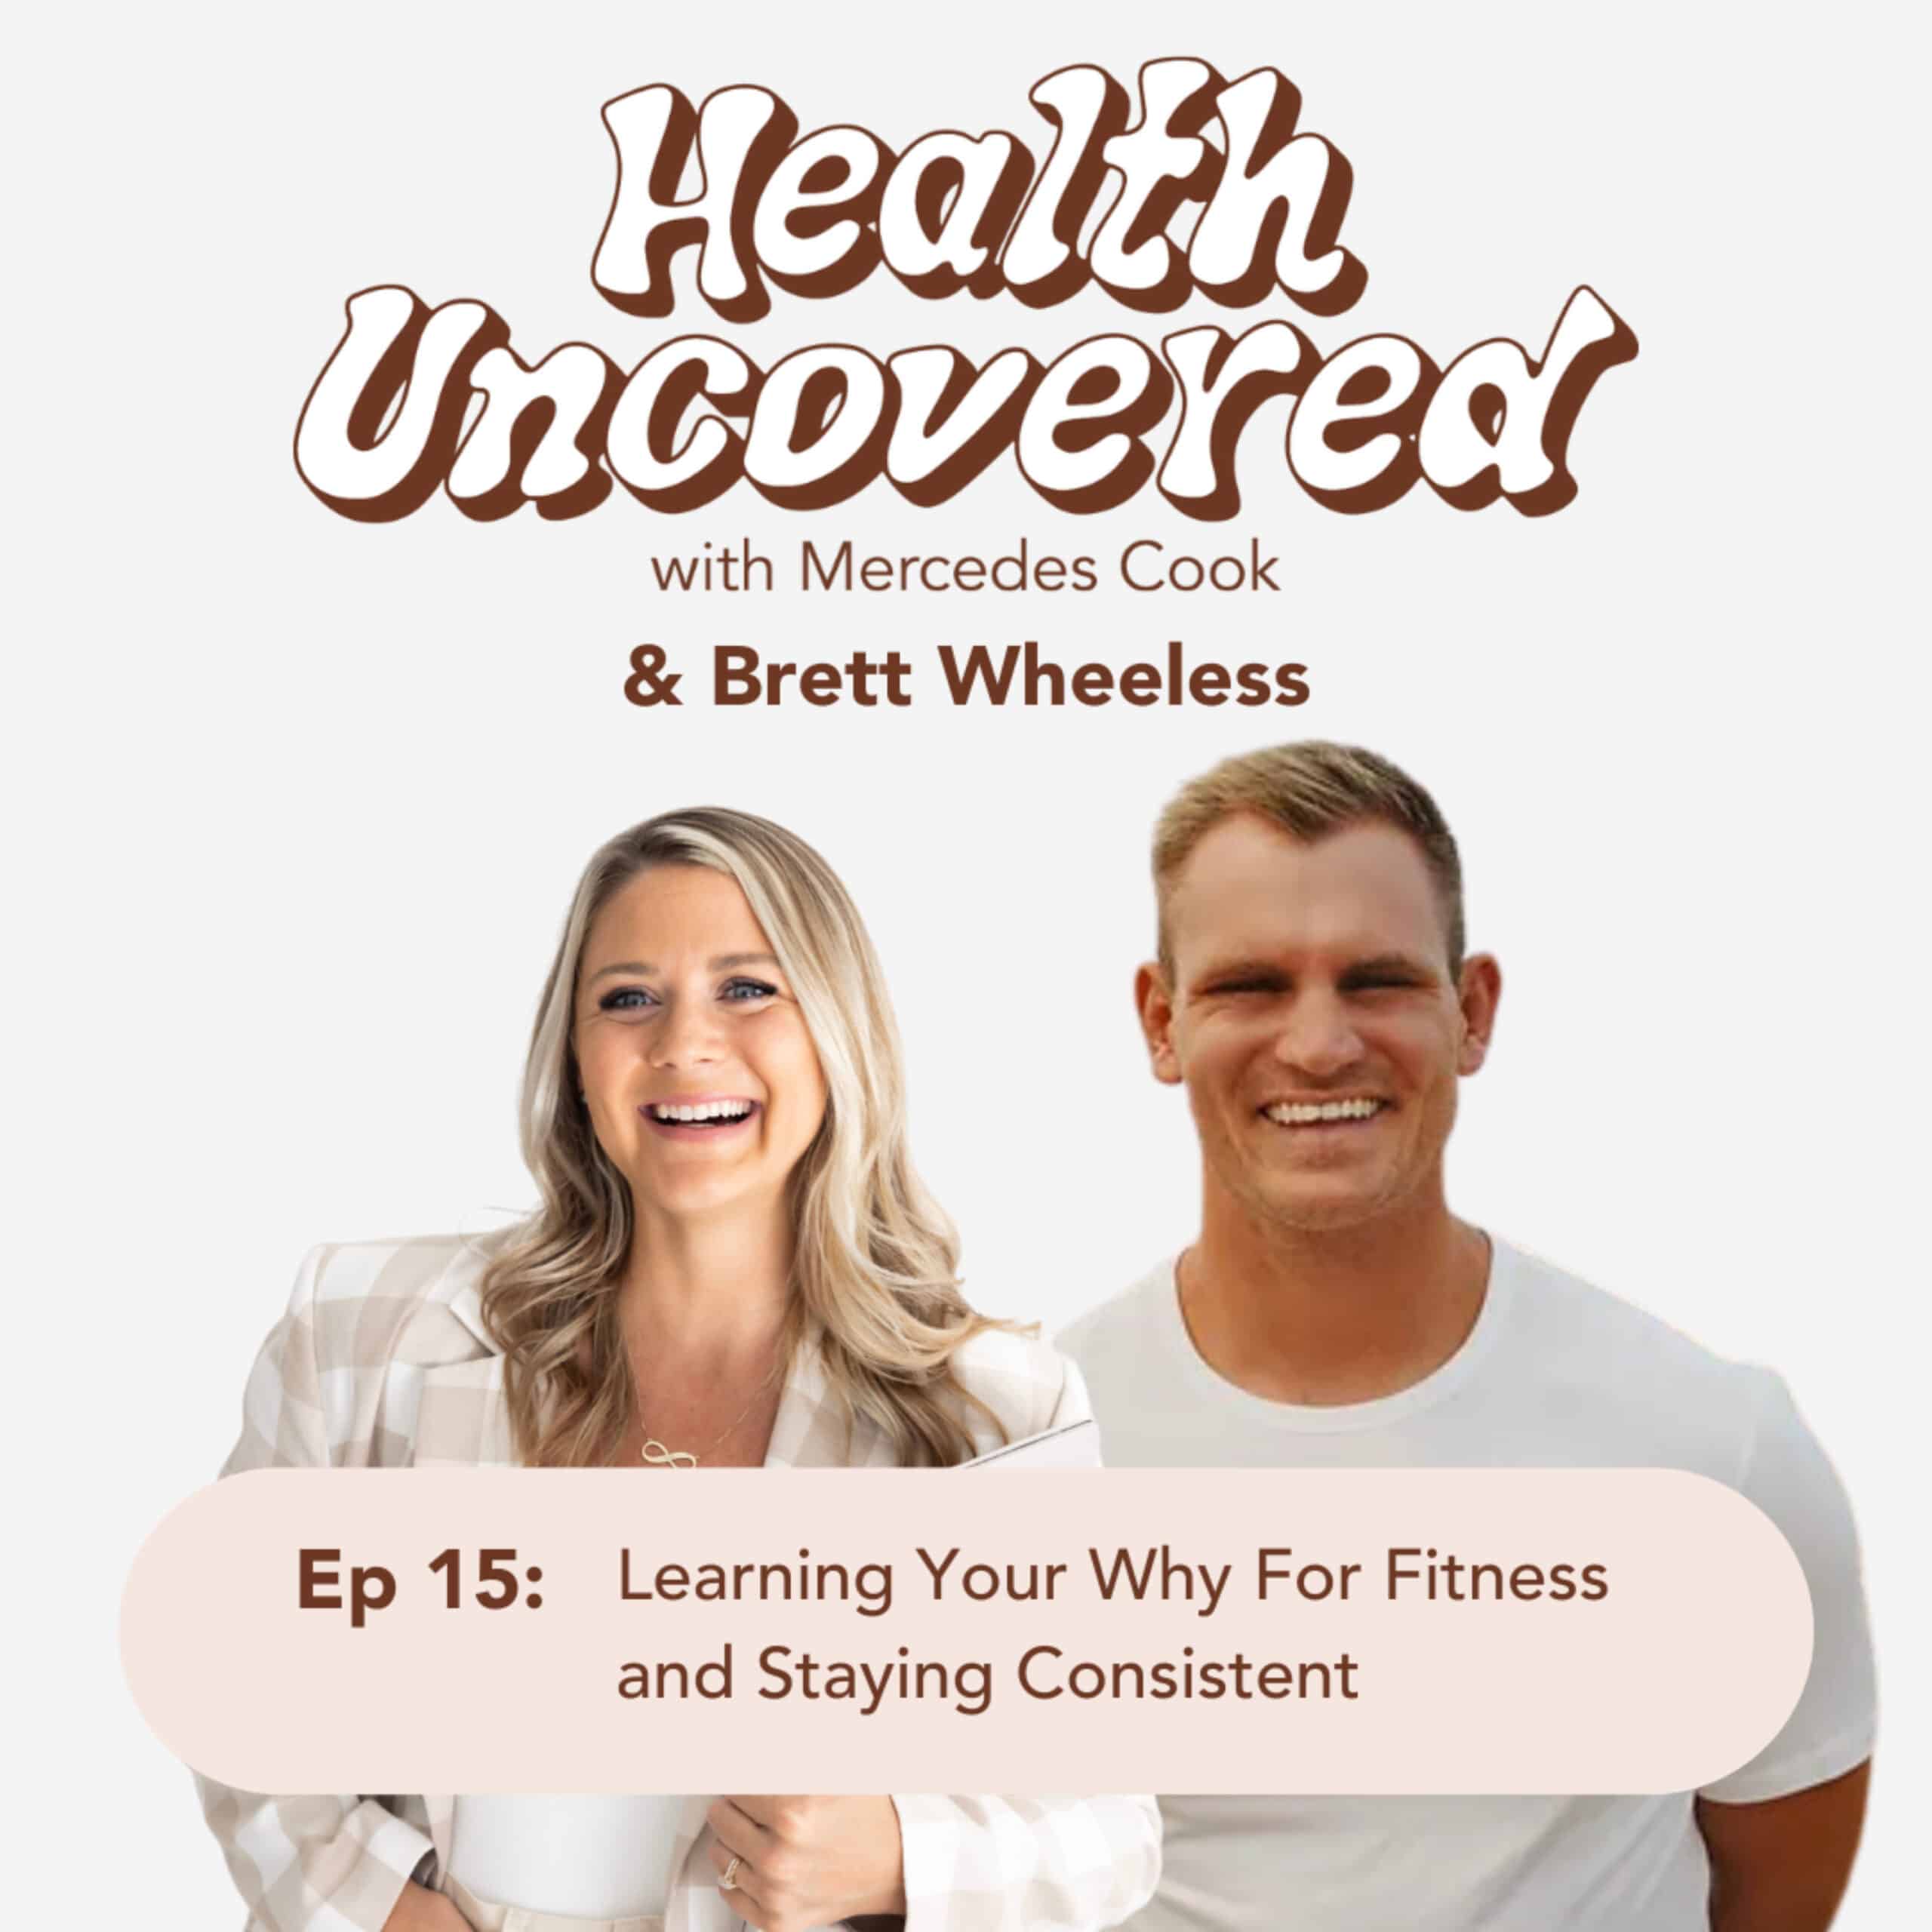 Learning Your Why For Fitness and Staying Consistent with Personal Trainer Brett Wheeless